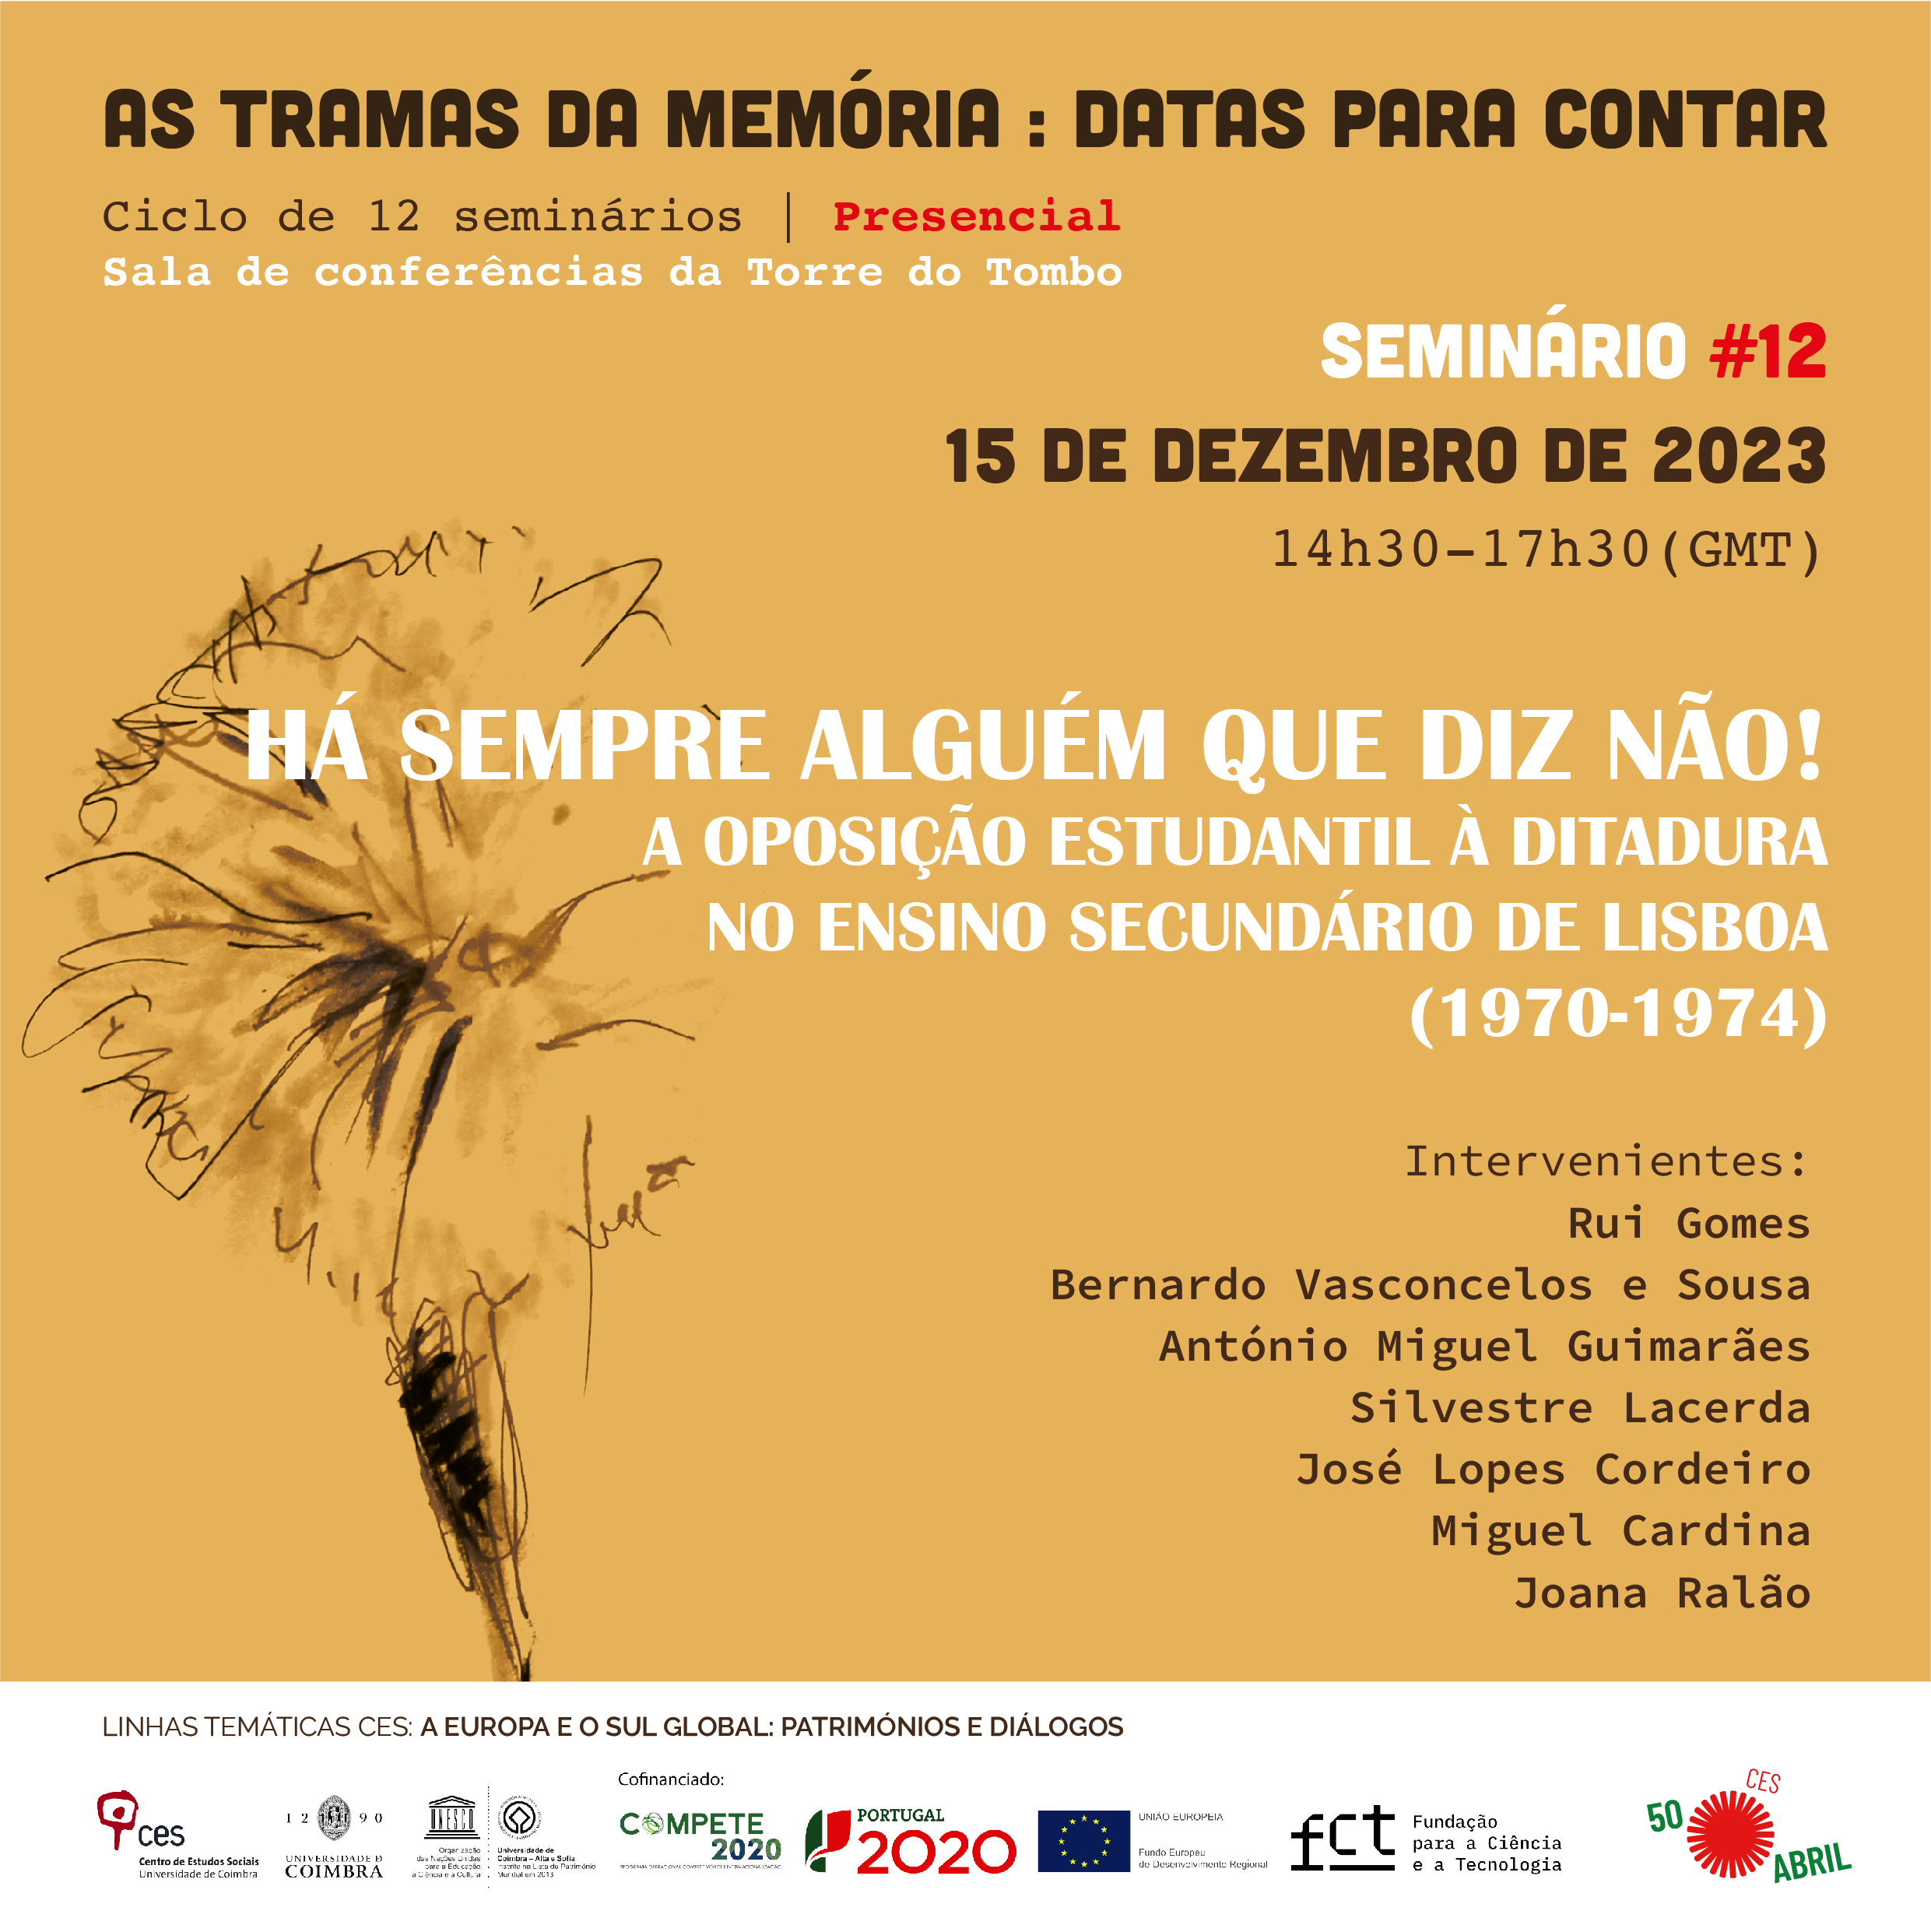 There is always someone who says no! Student opposition to the dictatorship in secondary education in Lisbon (1970-1974)<span id="edit_41745"><script>$(function() { $('#edit_41745').load( "/myces/user/editobj.php?tipo=evento&id=41745" ); });</script></span>